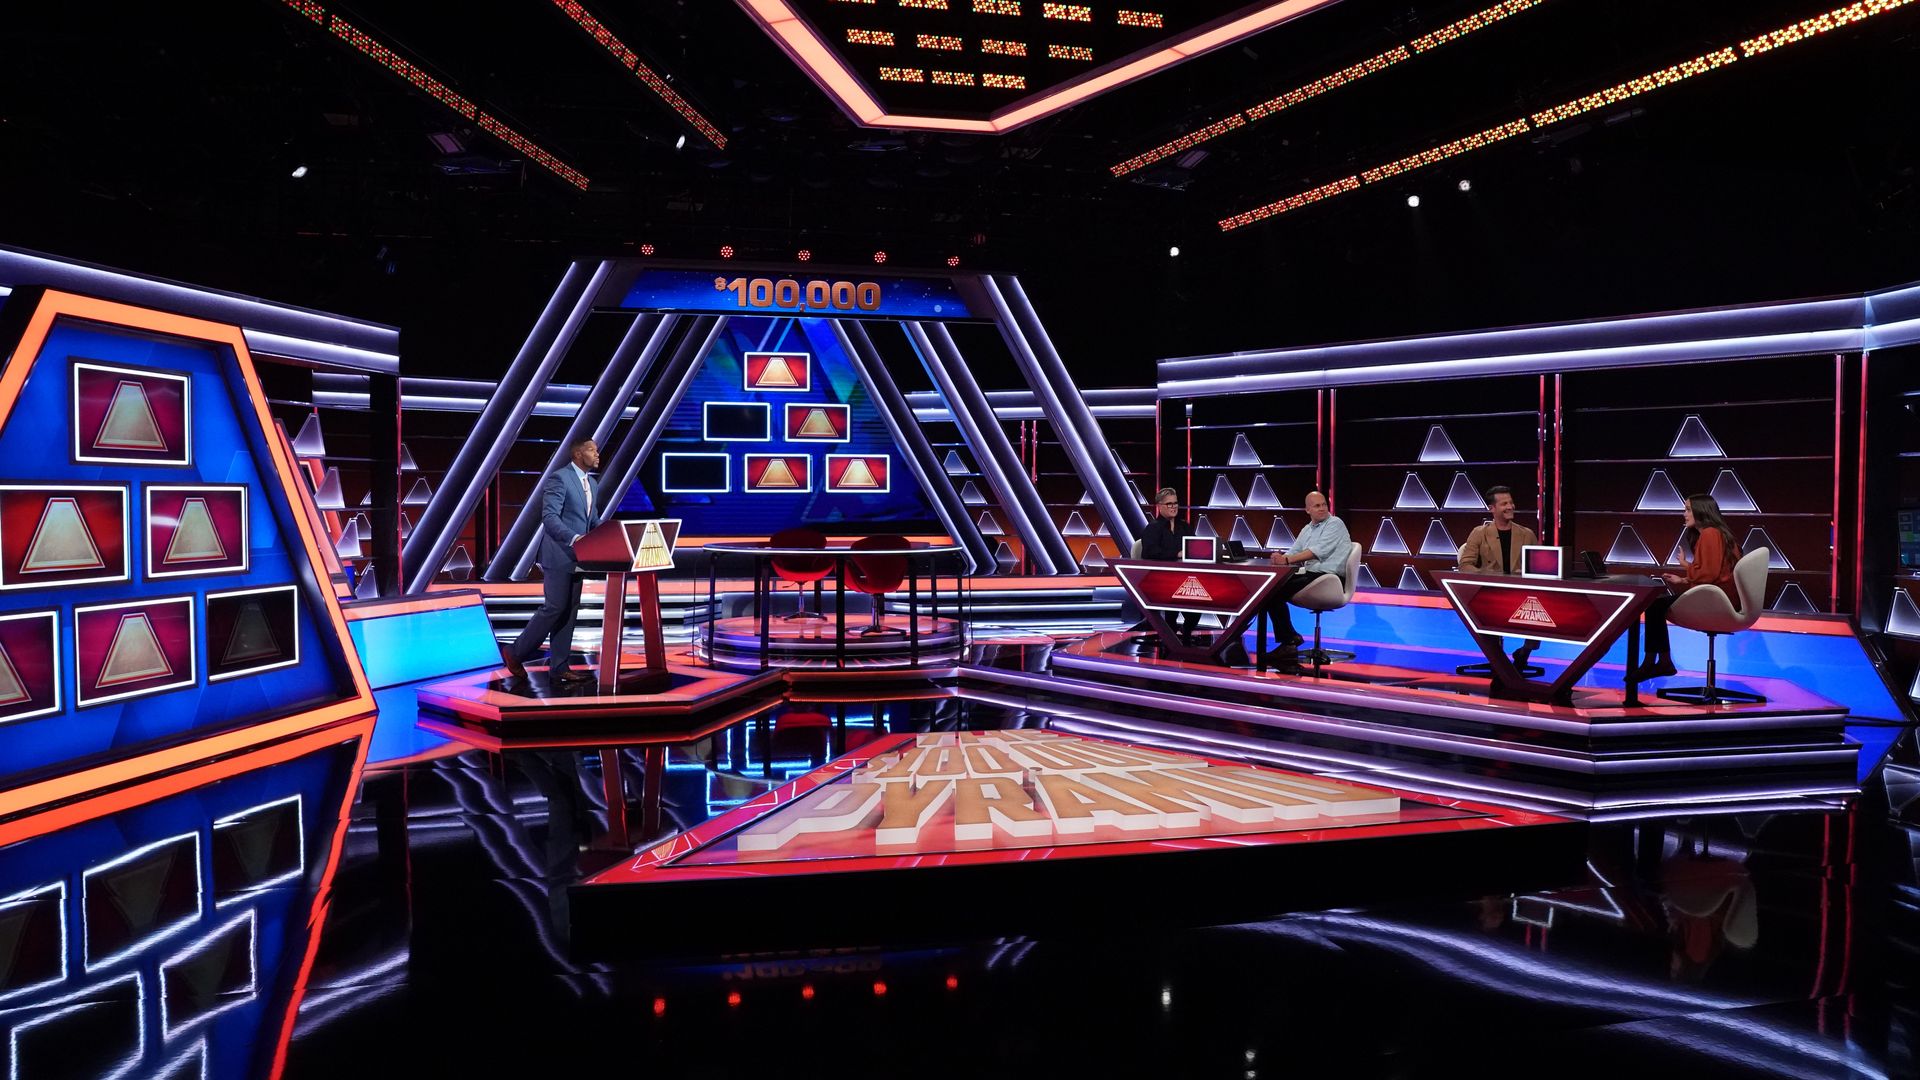 The $100,000 Pyramid background